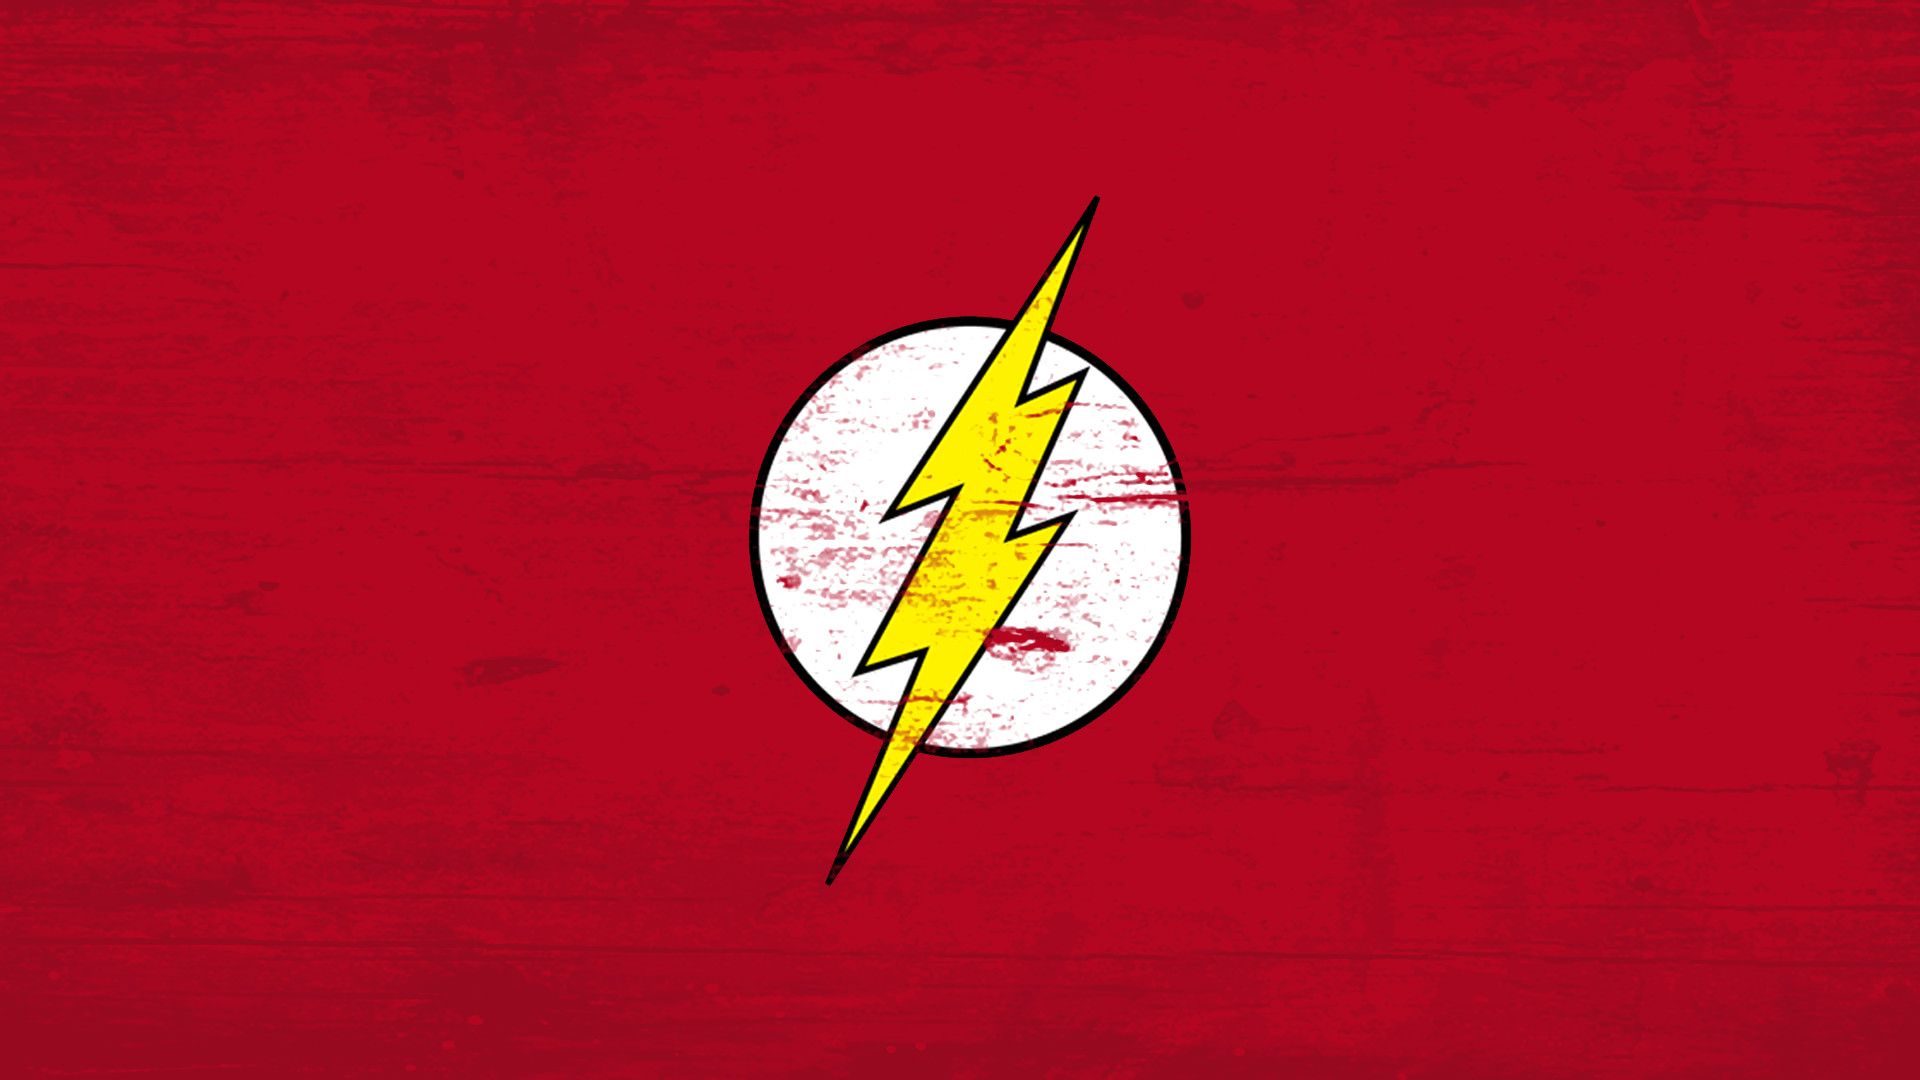 full size The Flash Logo Wallpaper 1920x1080 for iphone. Flash wallpaper, iPhone wallpaper hipster, Logo wallpaper hd